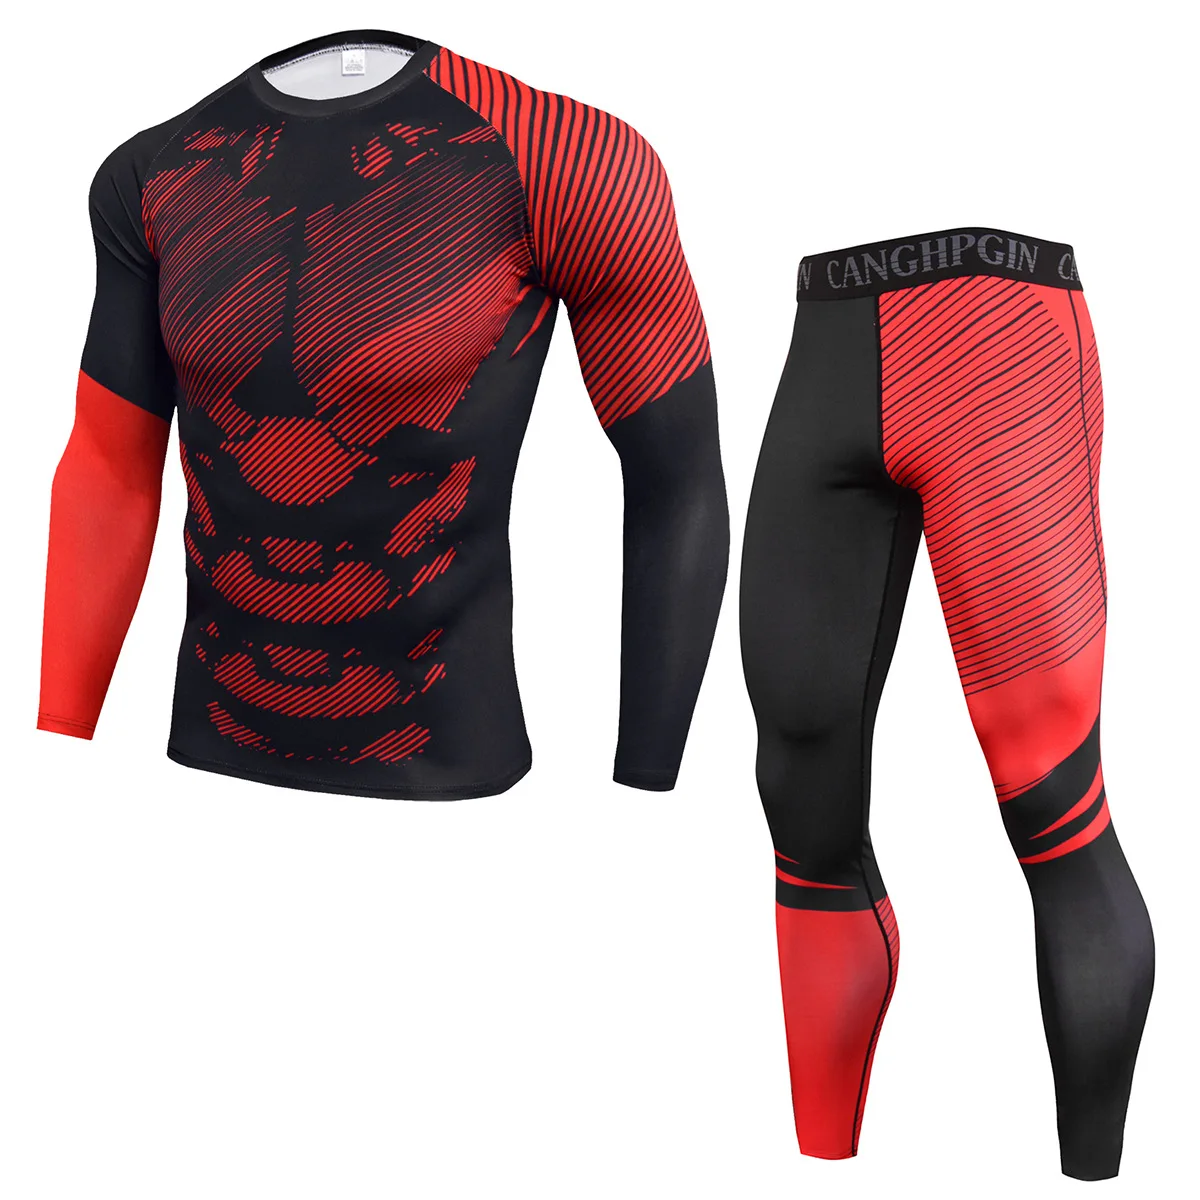 2022 Men's Tights Running Sets Breathable Jogging Basketball Sports Suit Underwear Sportswear Yoga Gym Fitness Tracksuit Clothes new men s 2022 quick men s suit running compression sportswear basketball tights clothes fitness jogging sportswear